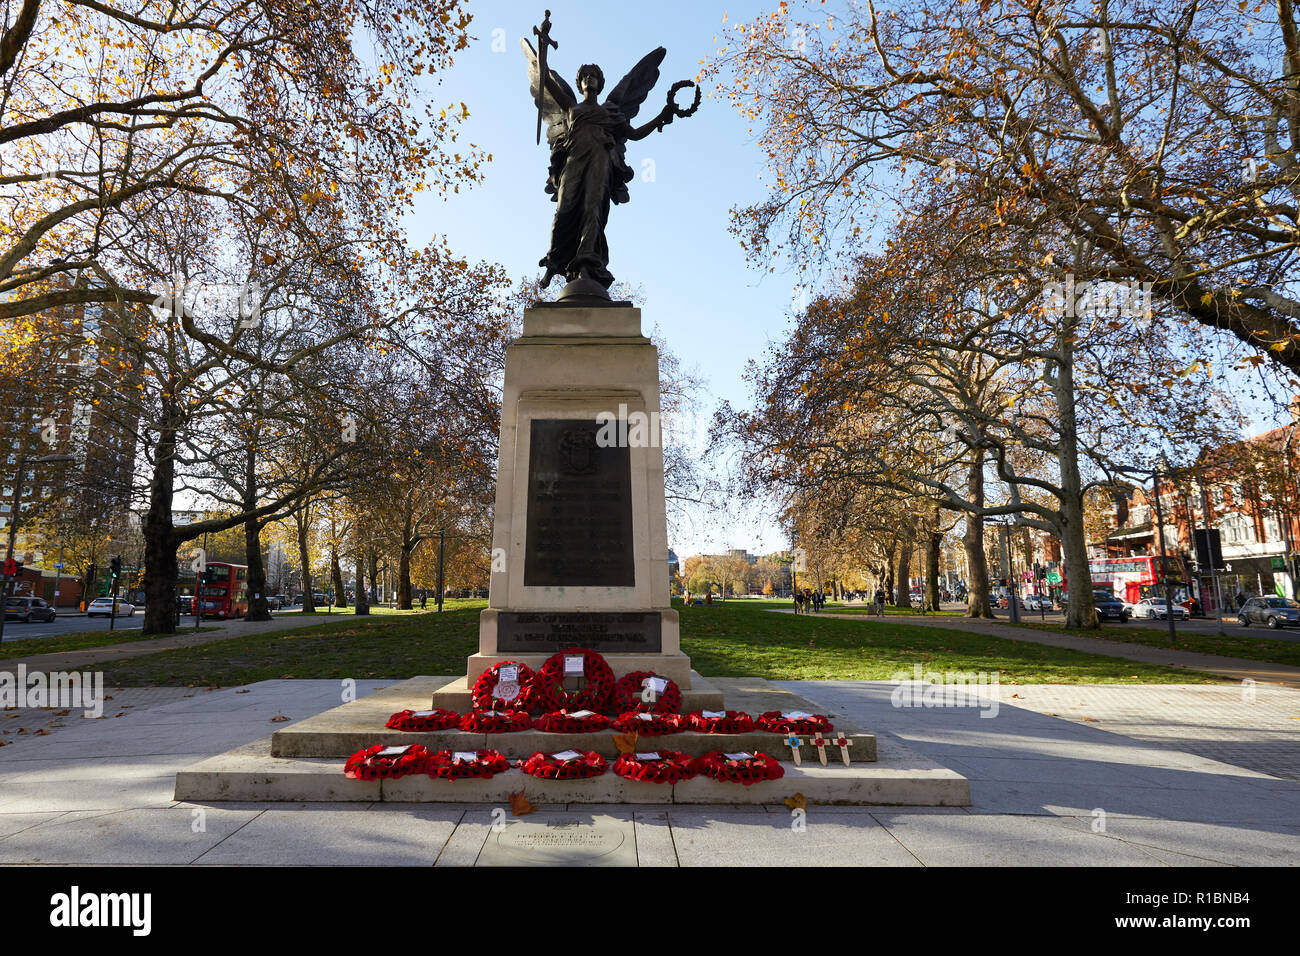 London, UK. - 11 November 2018: Poppy wreaths left at the Hammersmith War Memorial on Shepherd's Bush Green on the 100th anniversary since the end of World War One. Credit: Kevin J. Frost/Alamy Live News Stock Photo